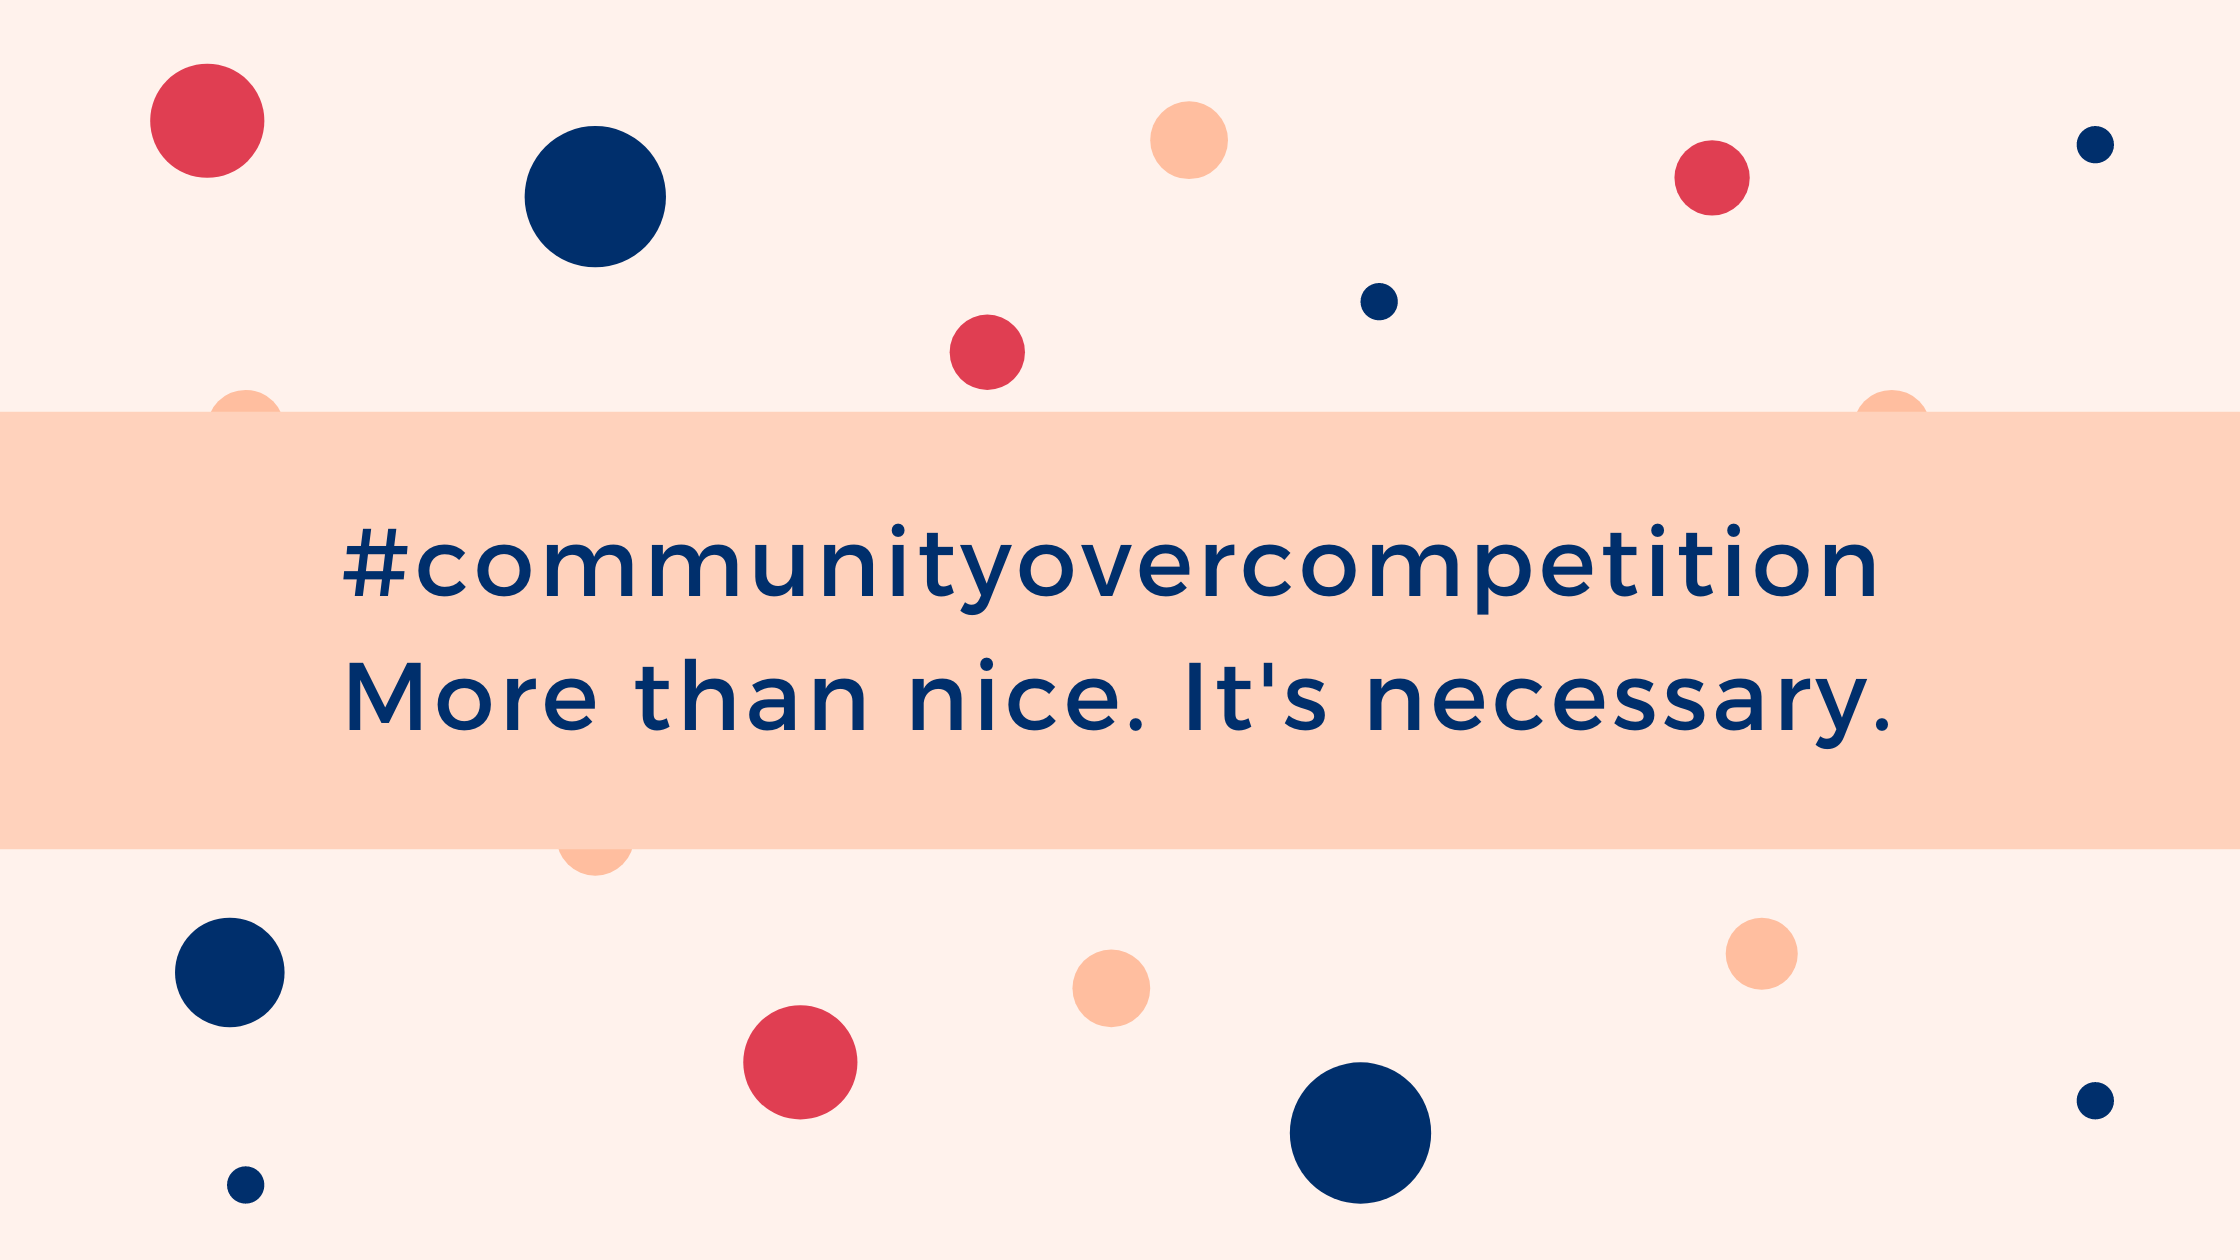 community over competition